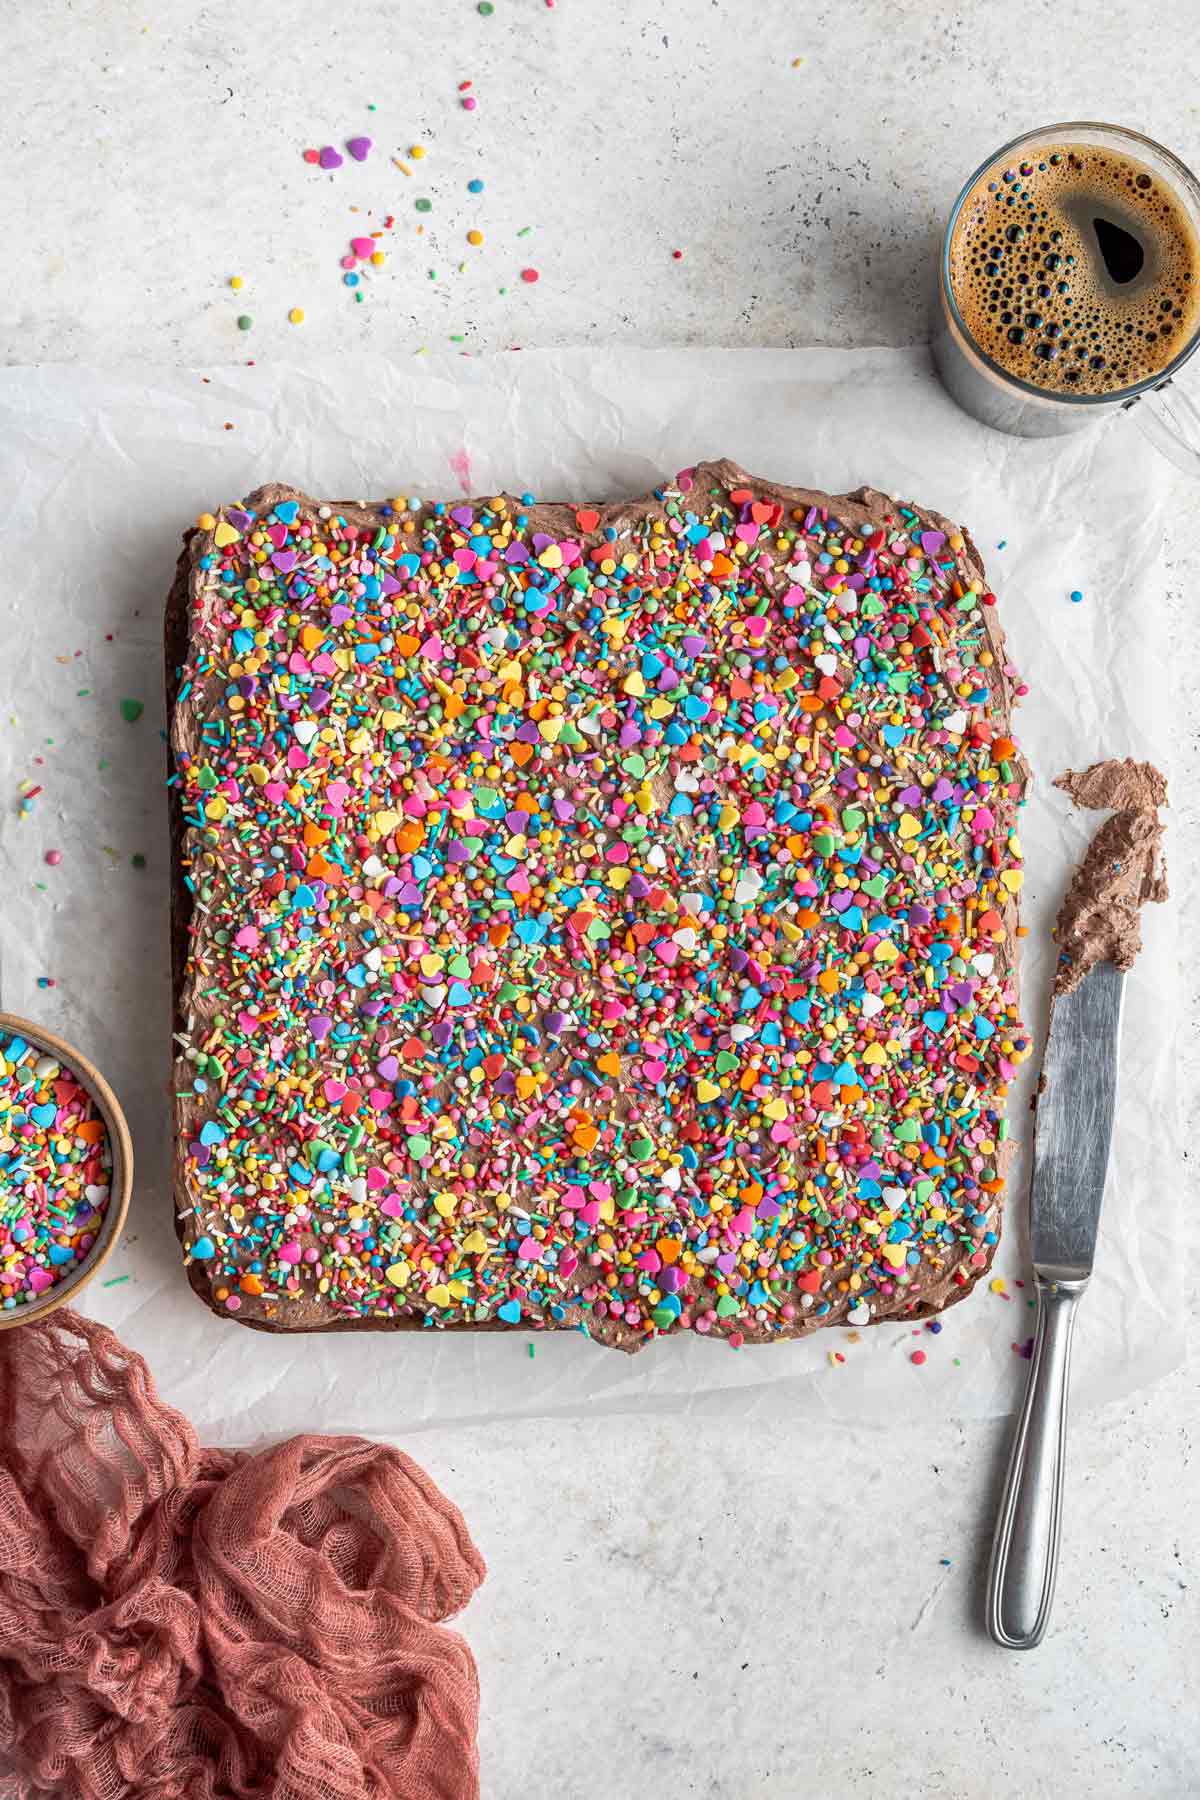 uncut brownies covered with frosting and colorful sprinkles